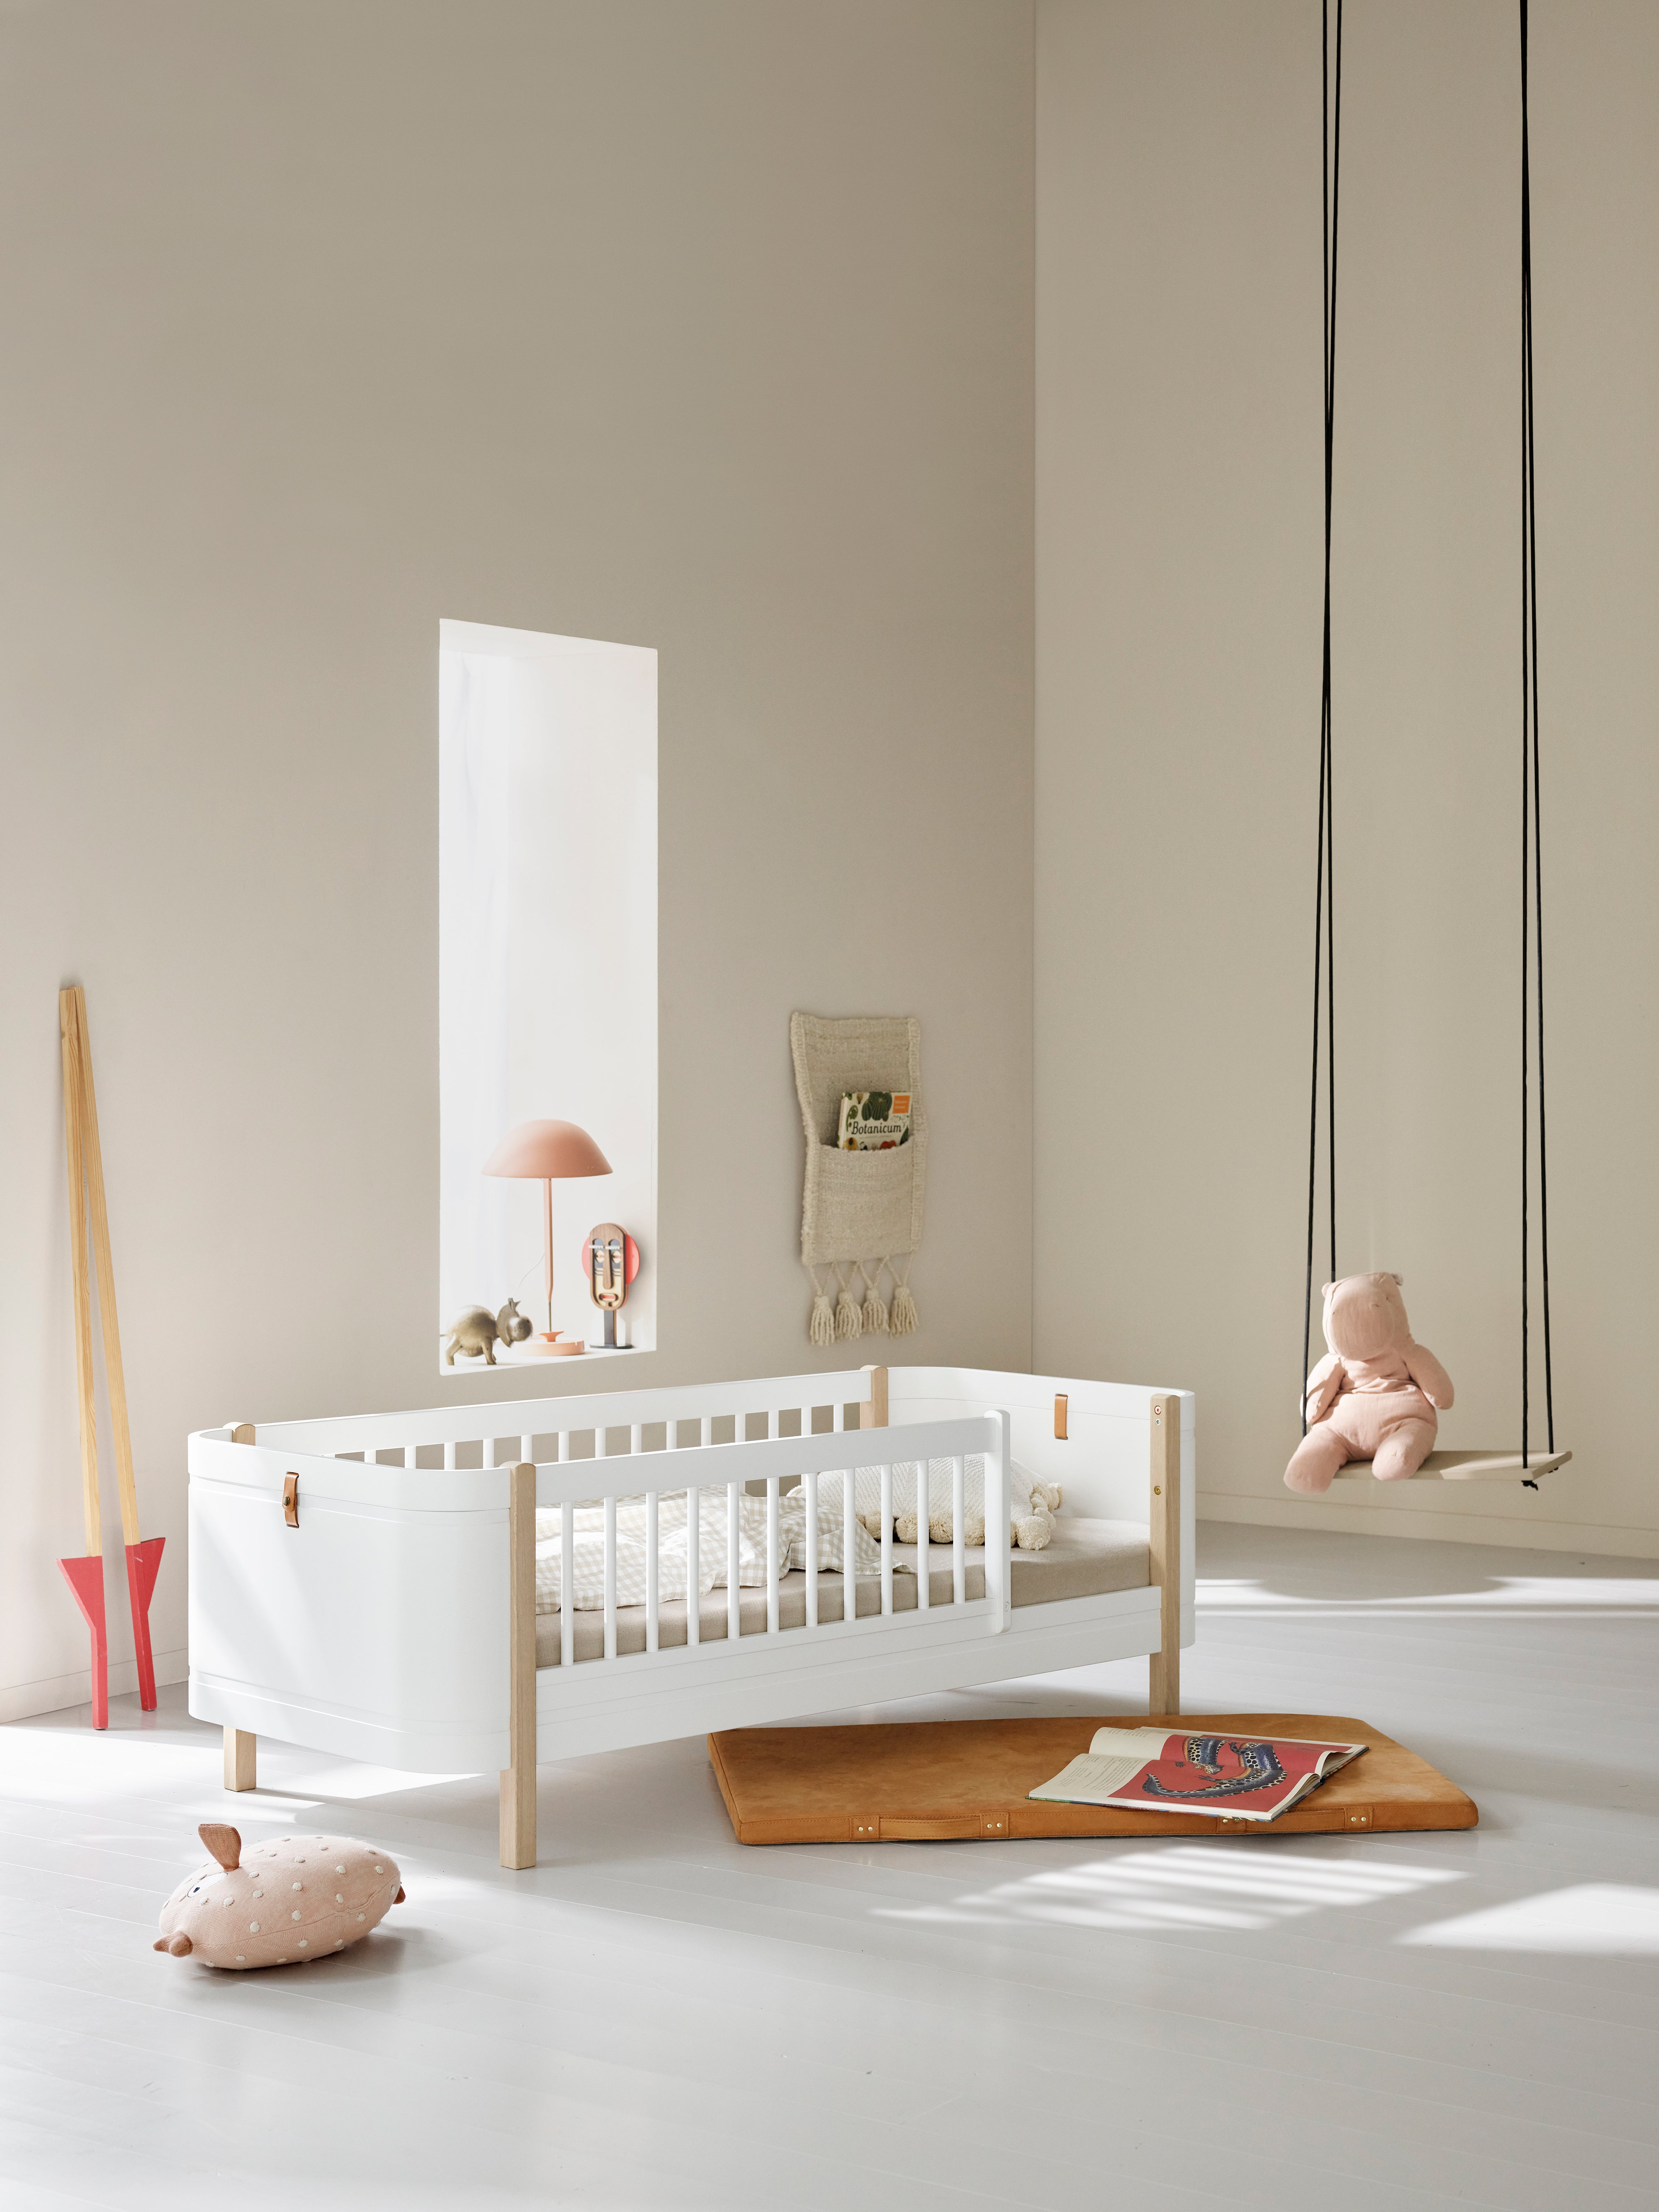 Conversion kit Oliver Furniture Wood Mini+ baby bed including junior bed and sibling set for 2 junior beds, white-oak